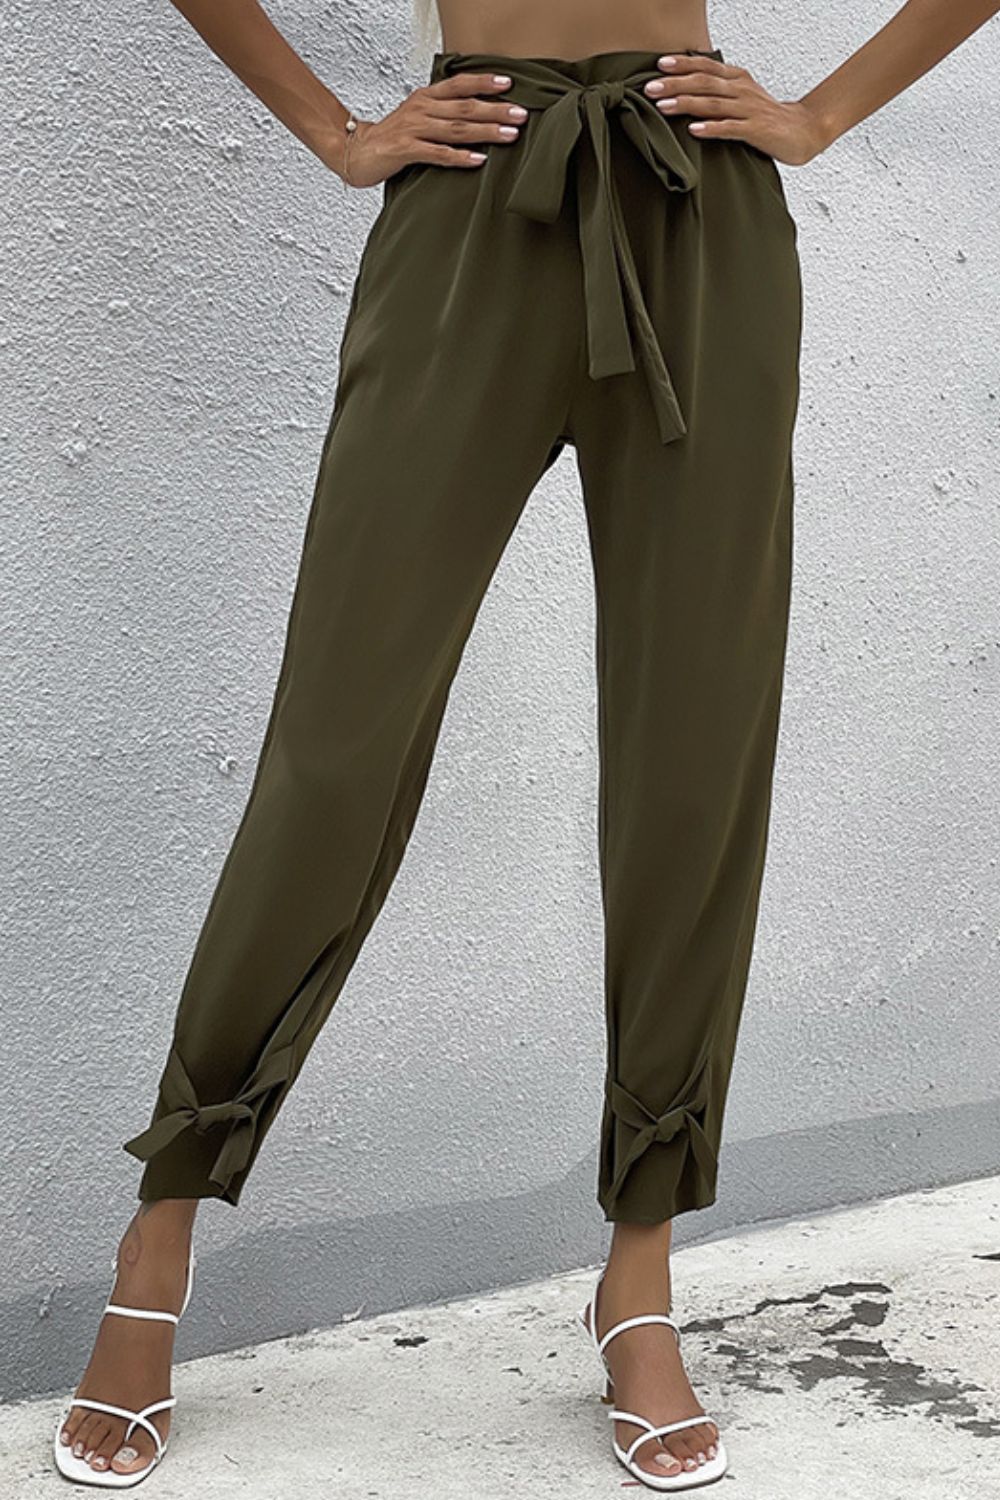 Tie Detail Belted Resort Pants with Pockets